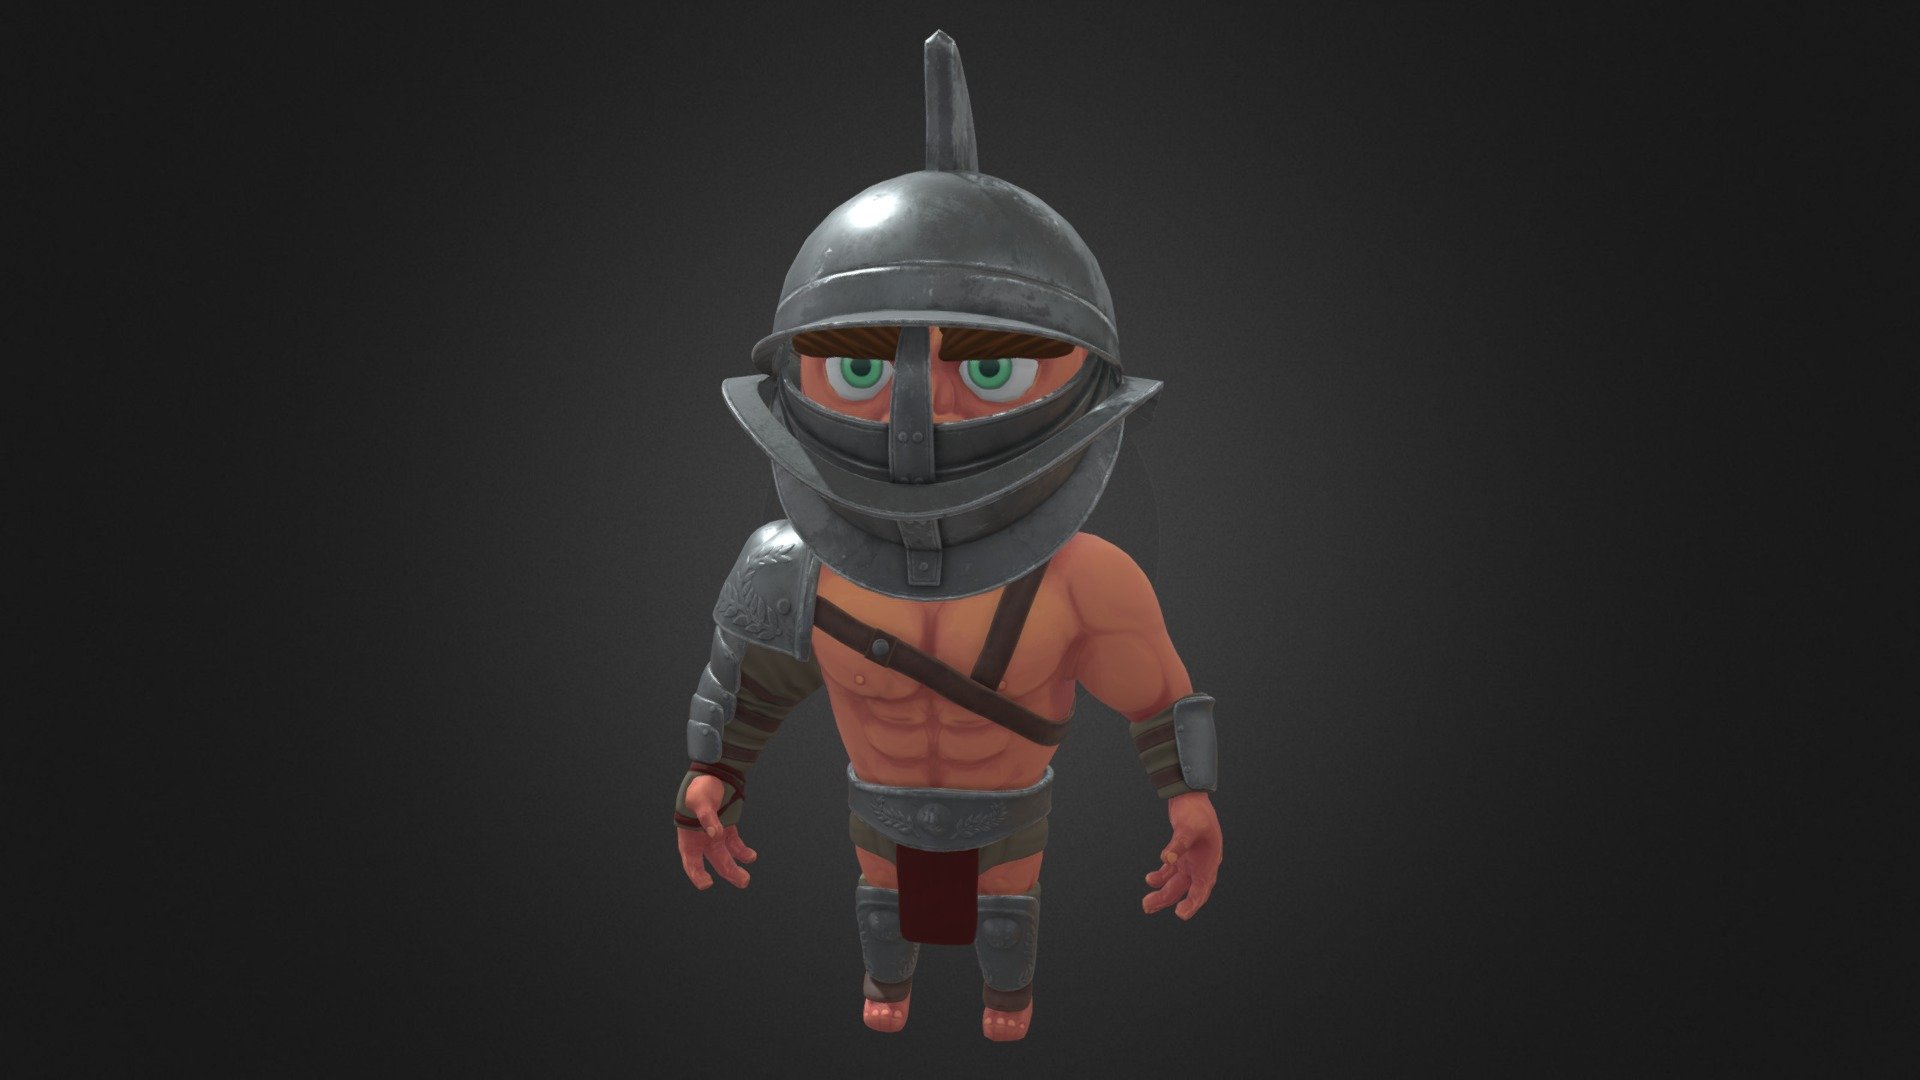 A stylized armour set inspired by the roman Thraex/Thracian gladiator armour style - Thraex Armour full set - 3D model by Fraser Gray (@FraserG) 3d model